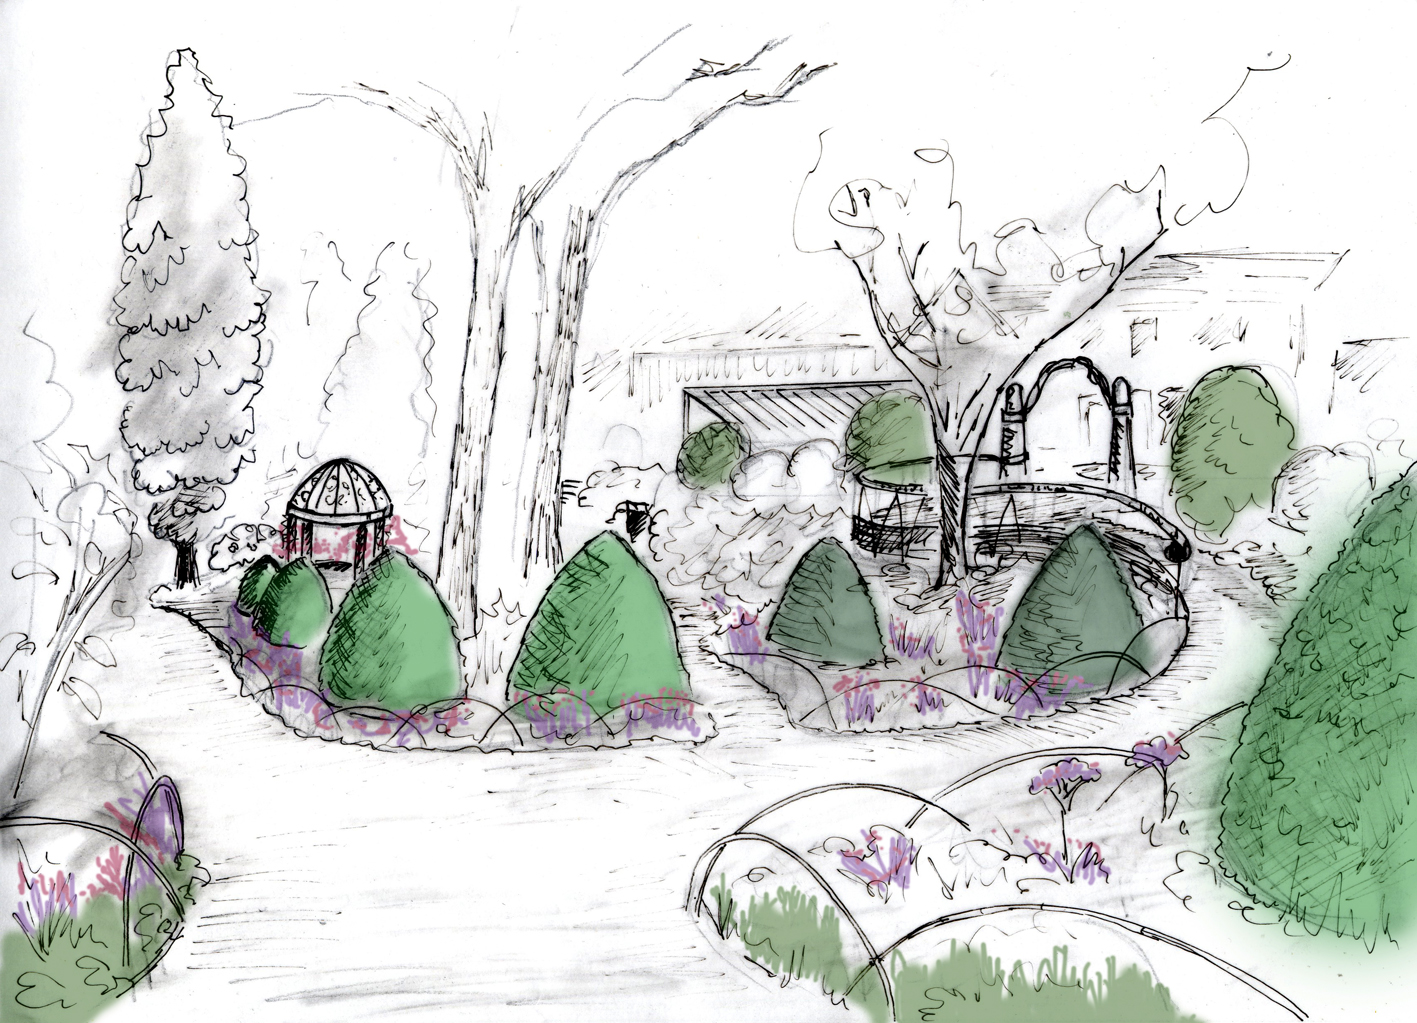 Concept for the Rose Arbour by Eves & Lewis Landscape Design